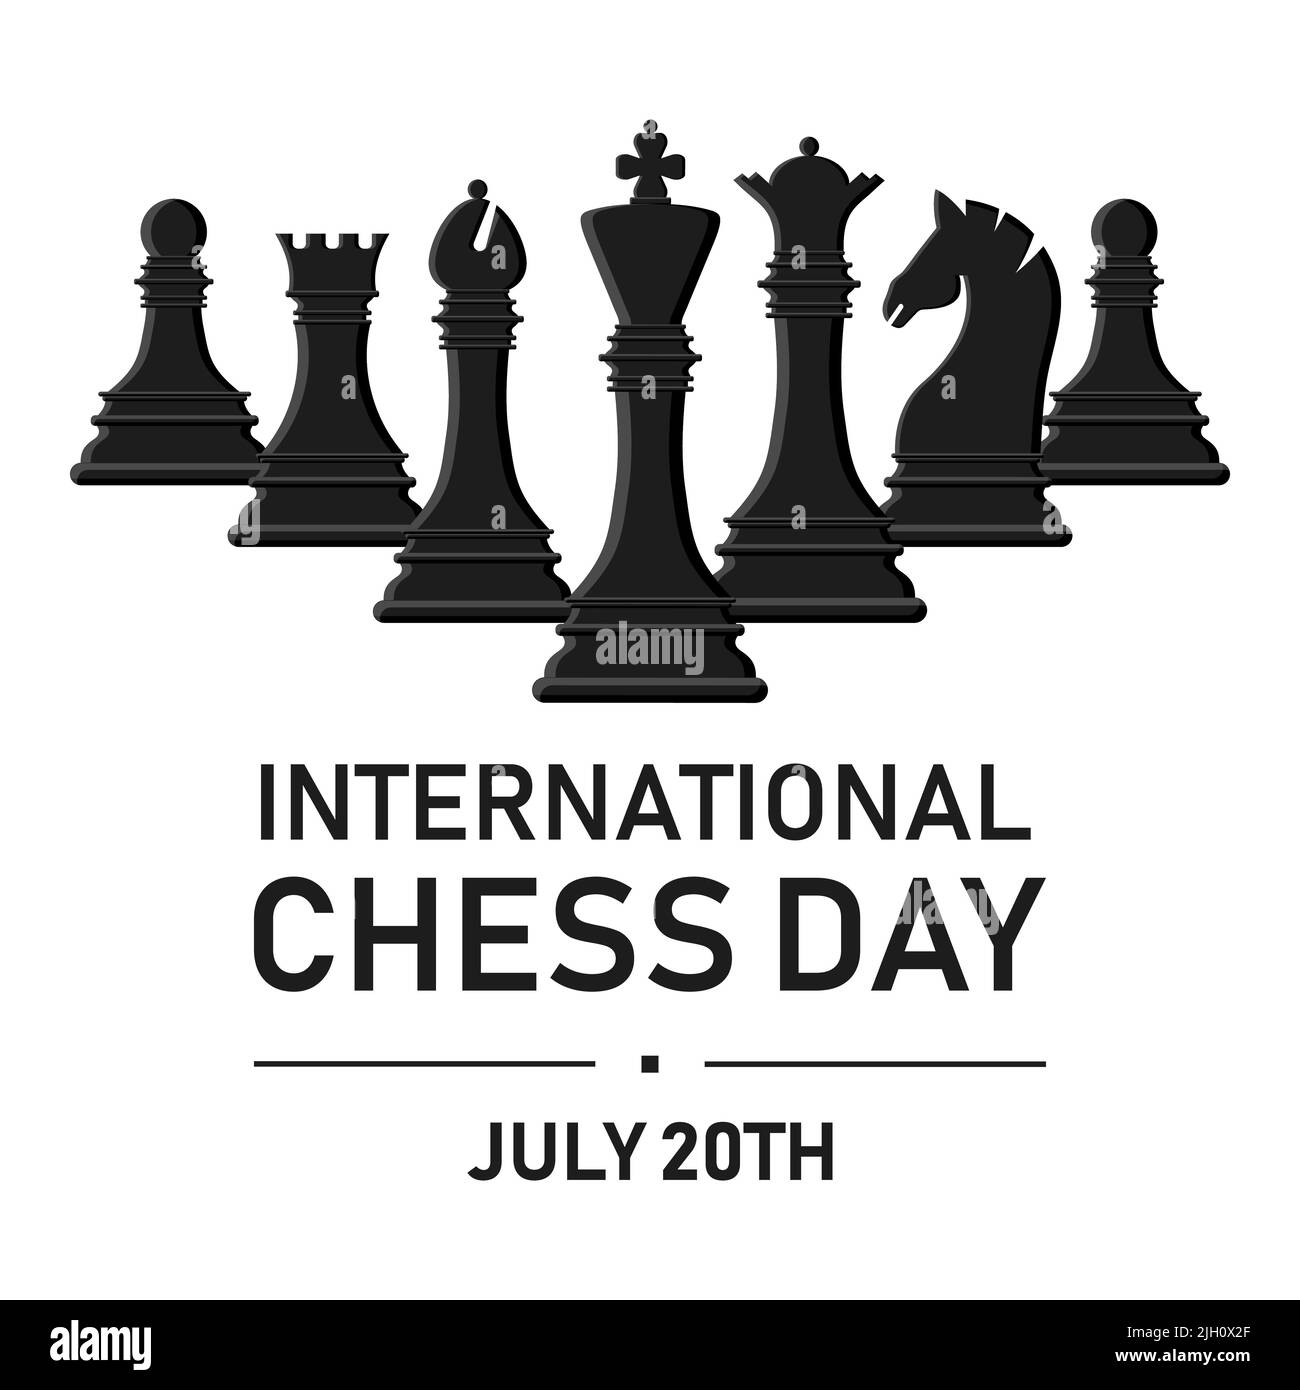 International chess day. Black silhouette chess pieces set isolated on white background. King, queen, rook, knight, bishop, pawn. Vector illustration Stock Vector